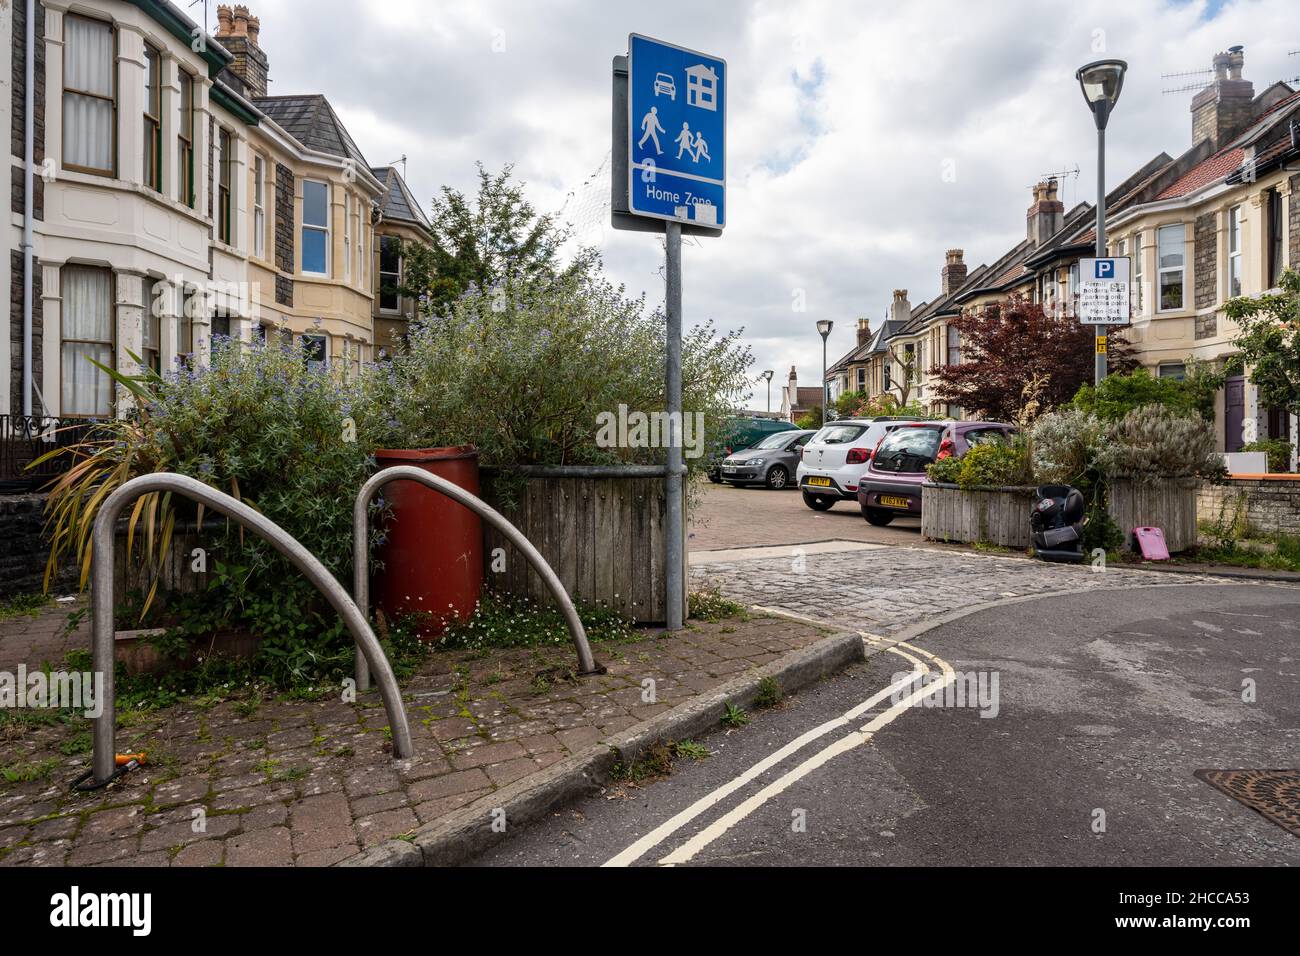 Plants, cycle racks and cobbled surfaces feature in a 'Home Zone' traffic calming scheme in a residential street in Southville, Bristol. Stock Photo